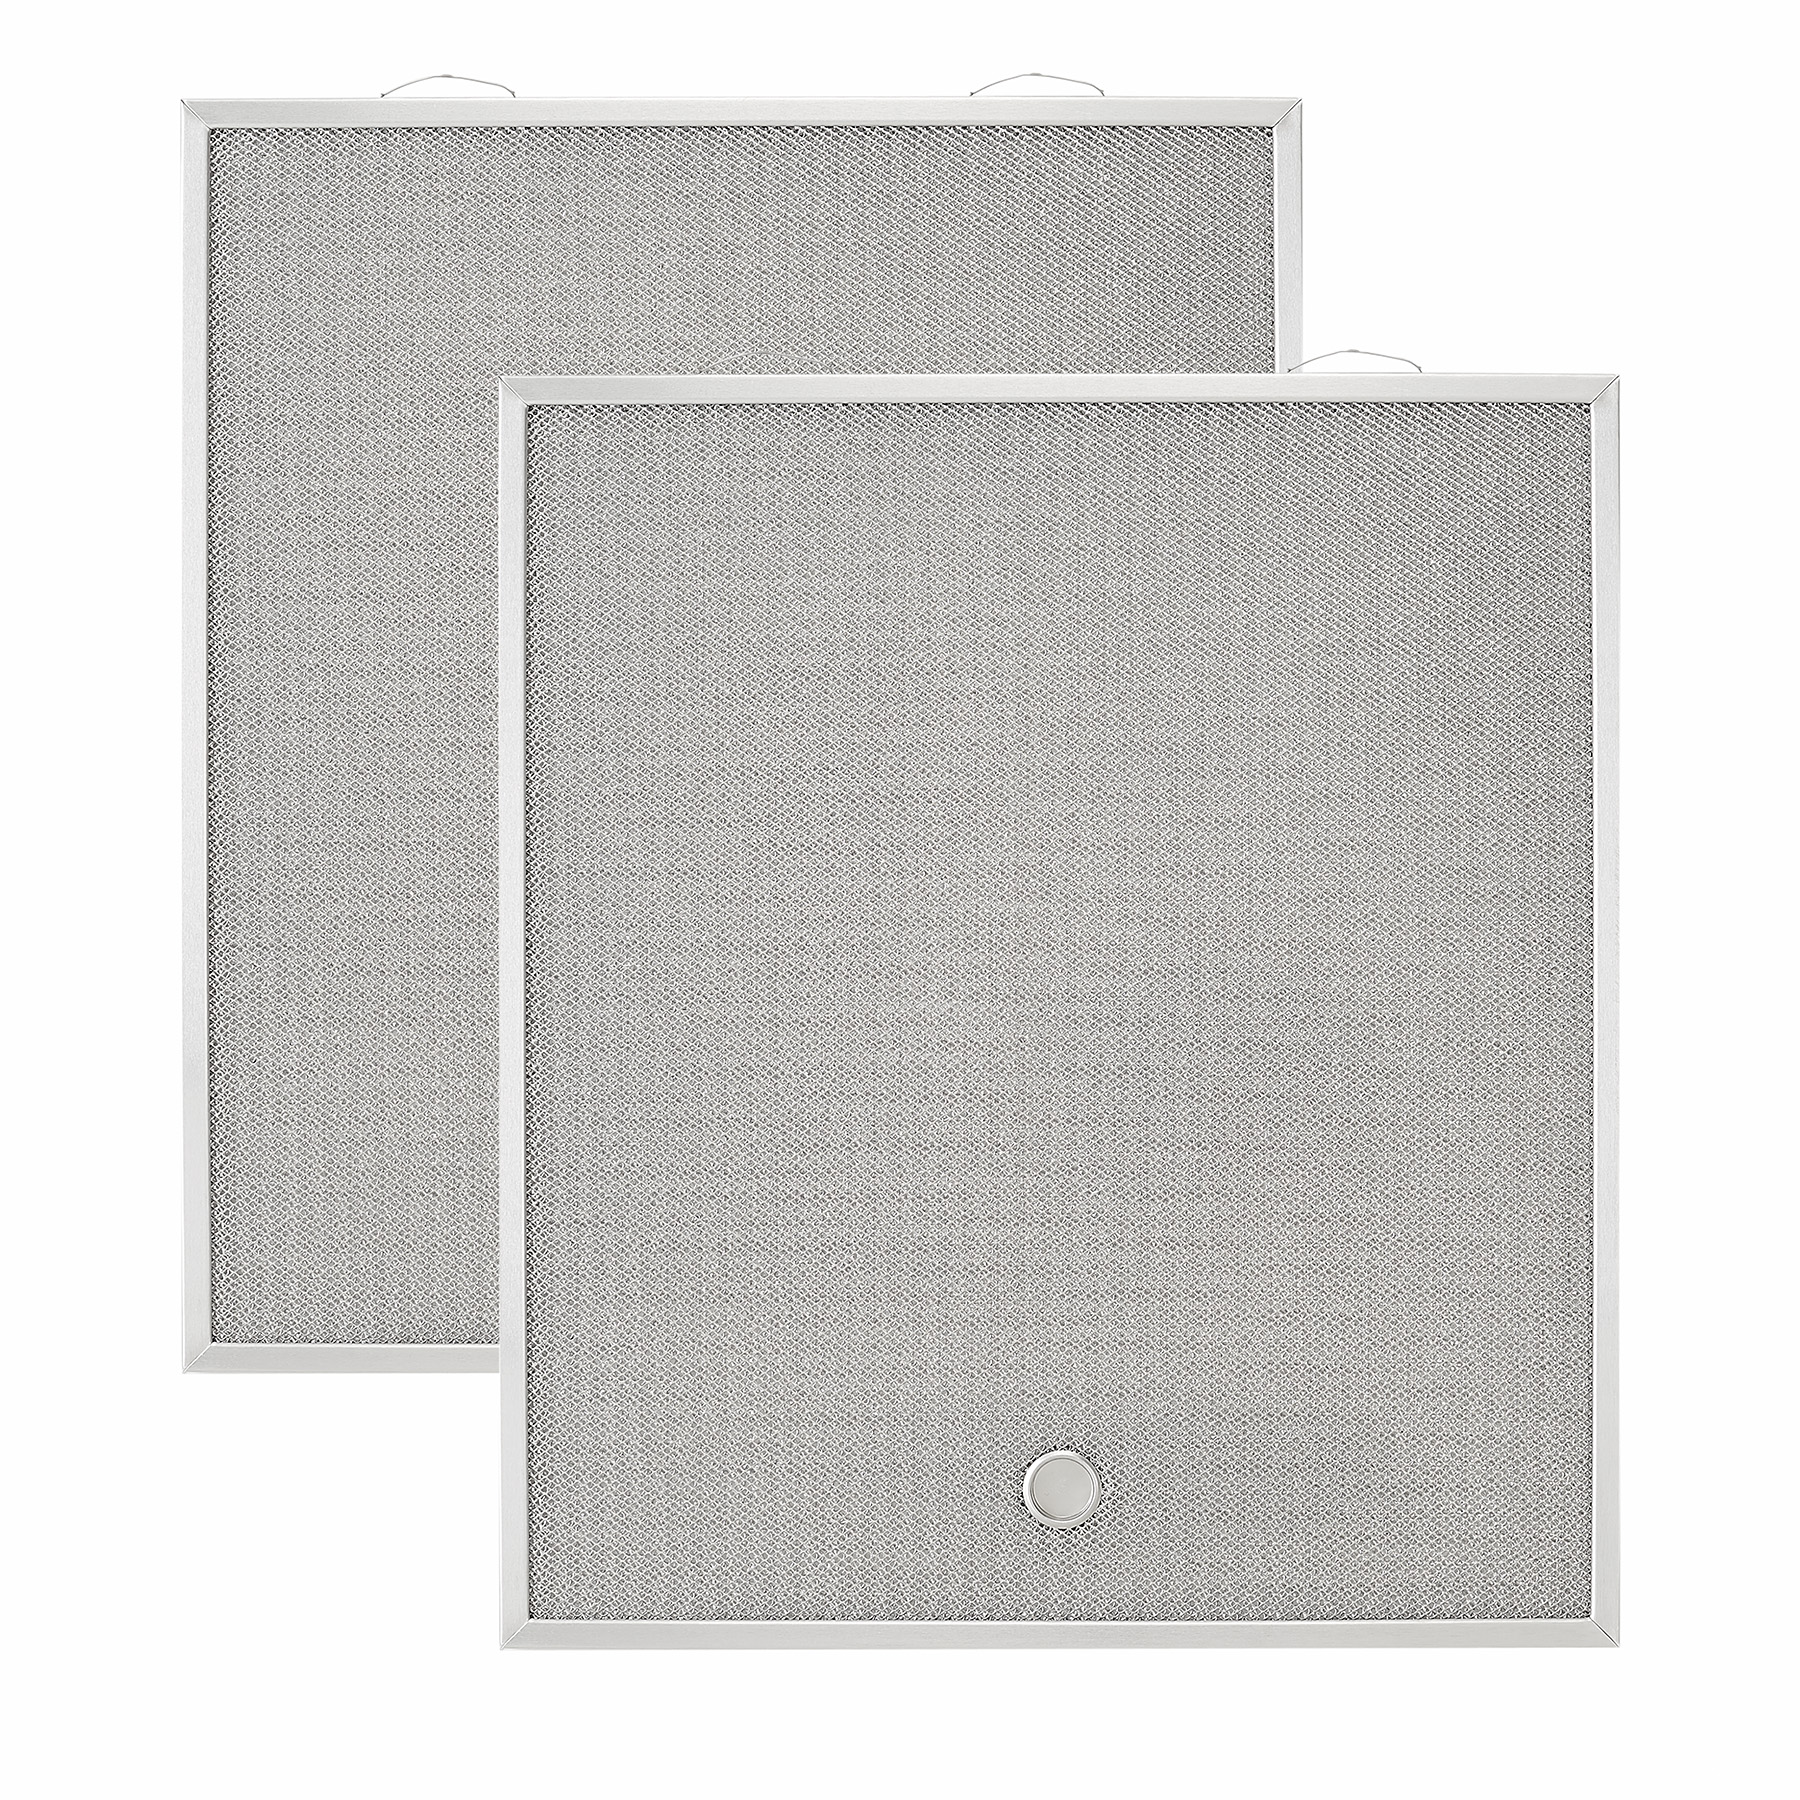 Broan-NuTone® Genuine Replacement Aluminum Filter for Range Hoods, 15-3/4" X 13-7/8", Fits Select Models, (2-Pack)